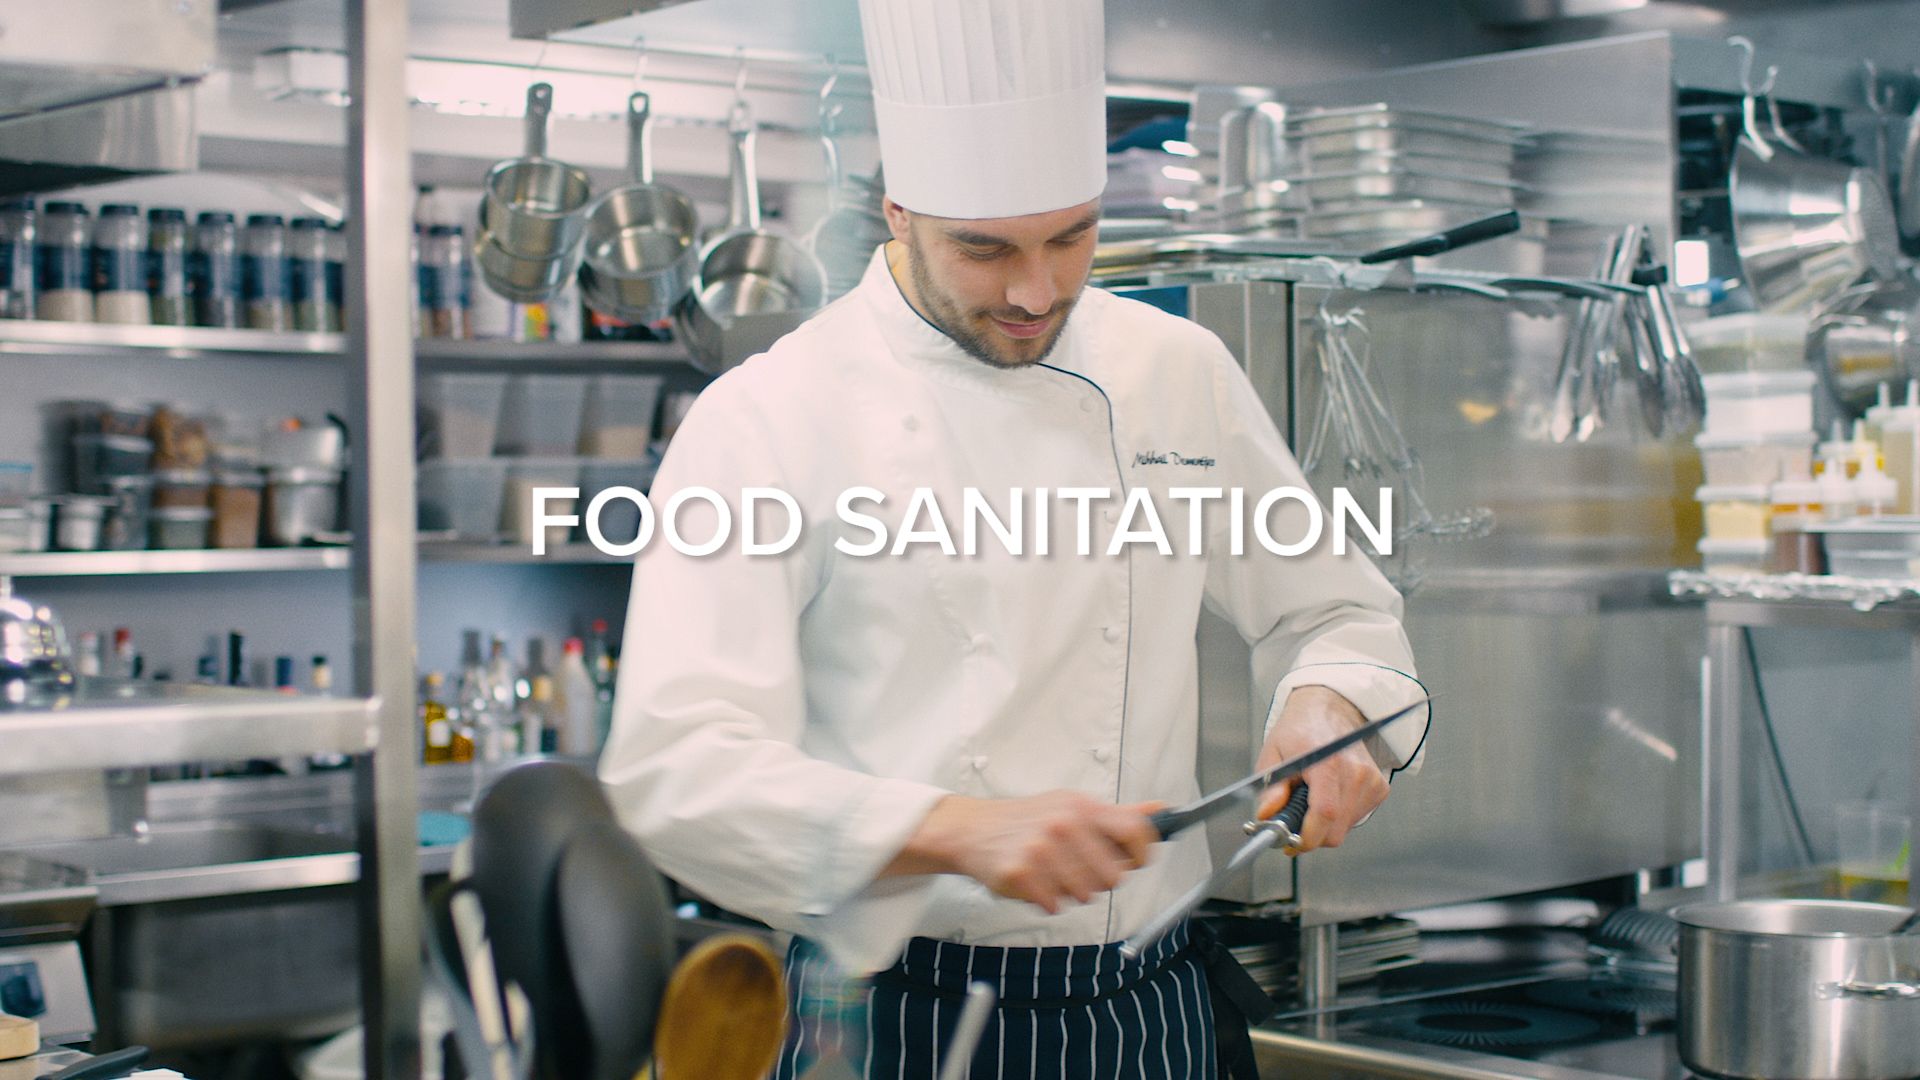 All the tools you need for Food Sanitation.